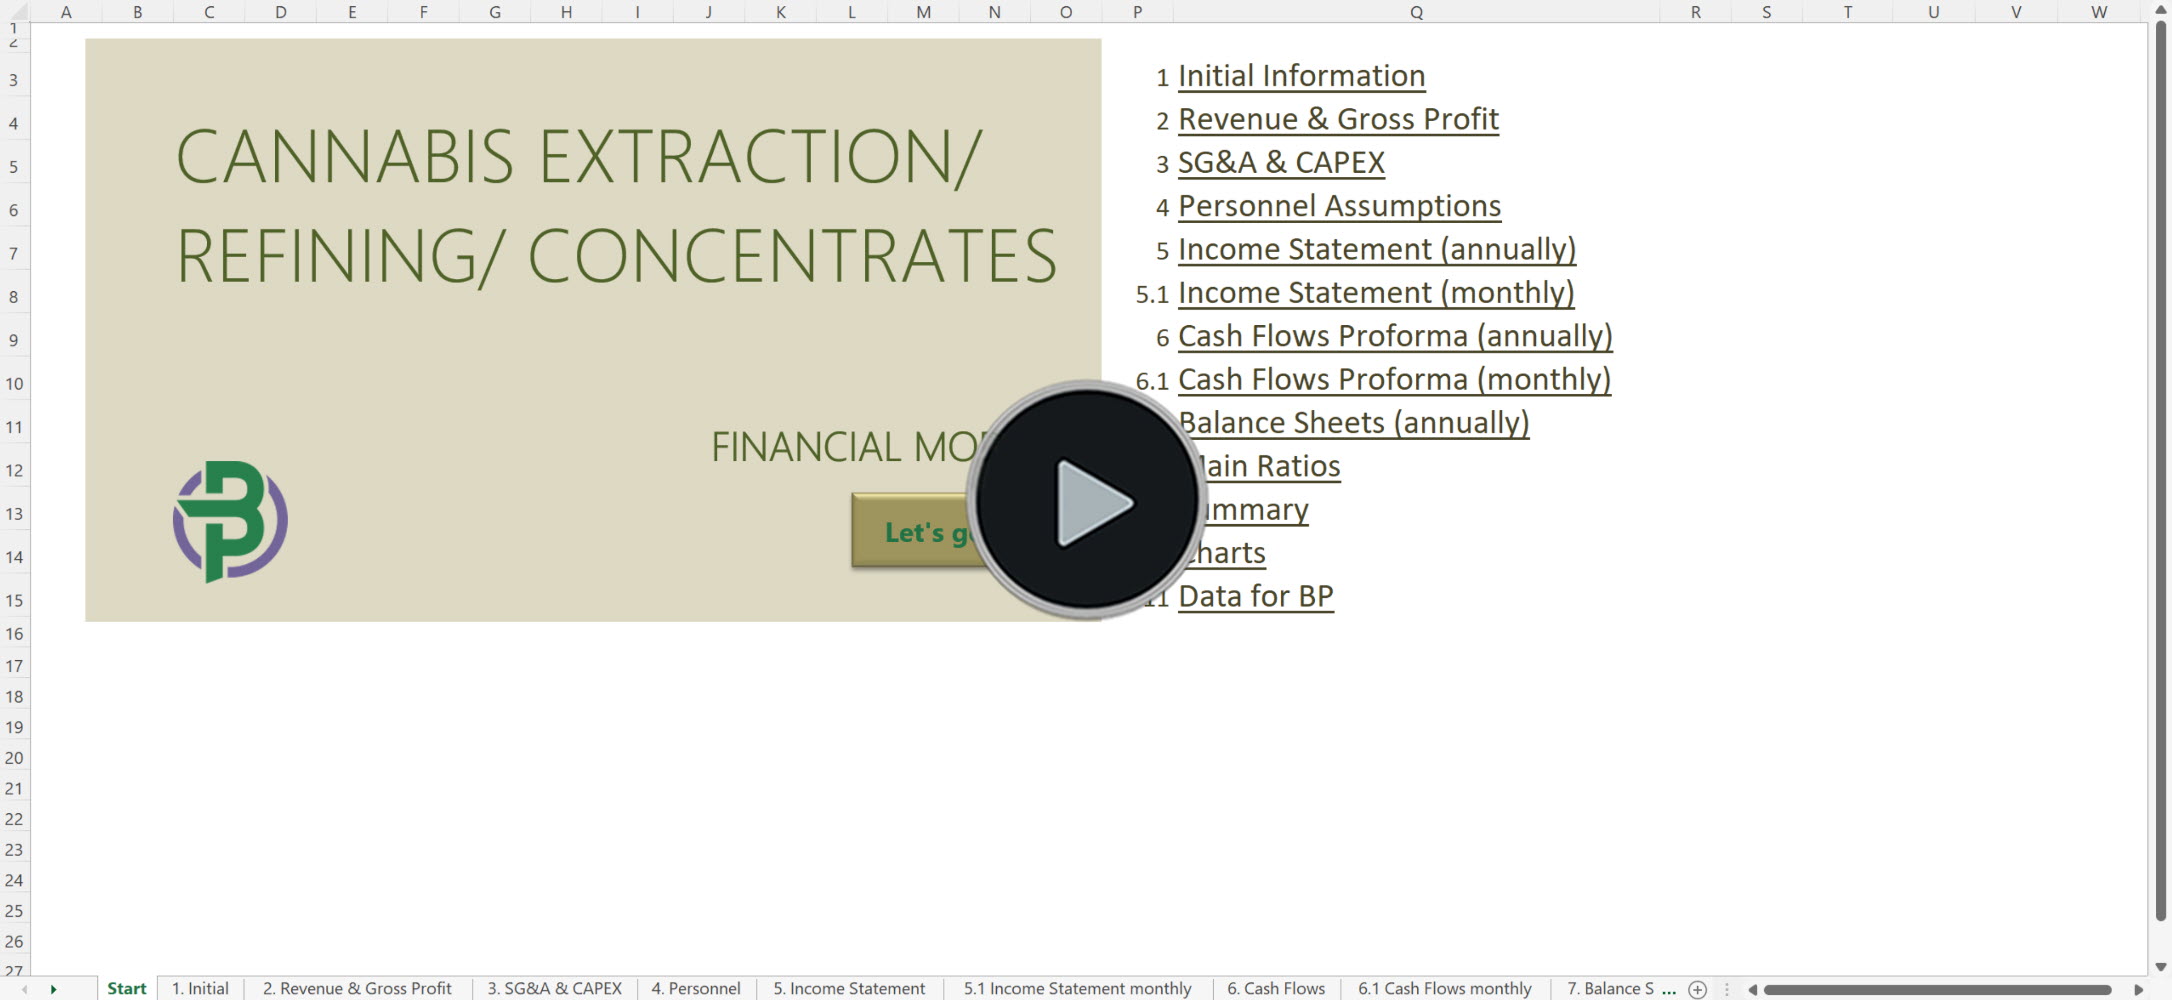 Cannabis Extraction Products Financial Model